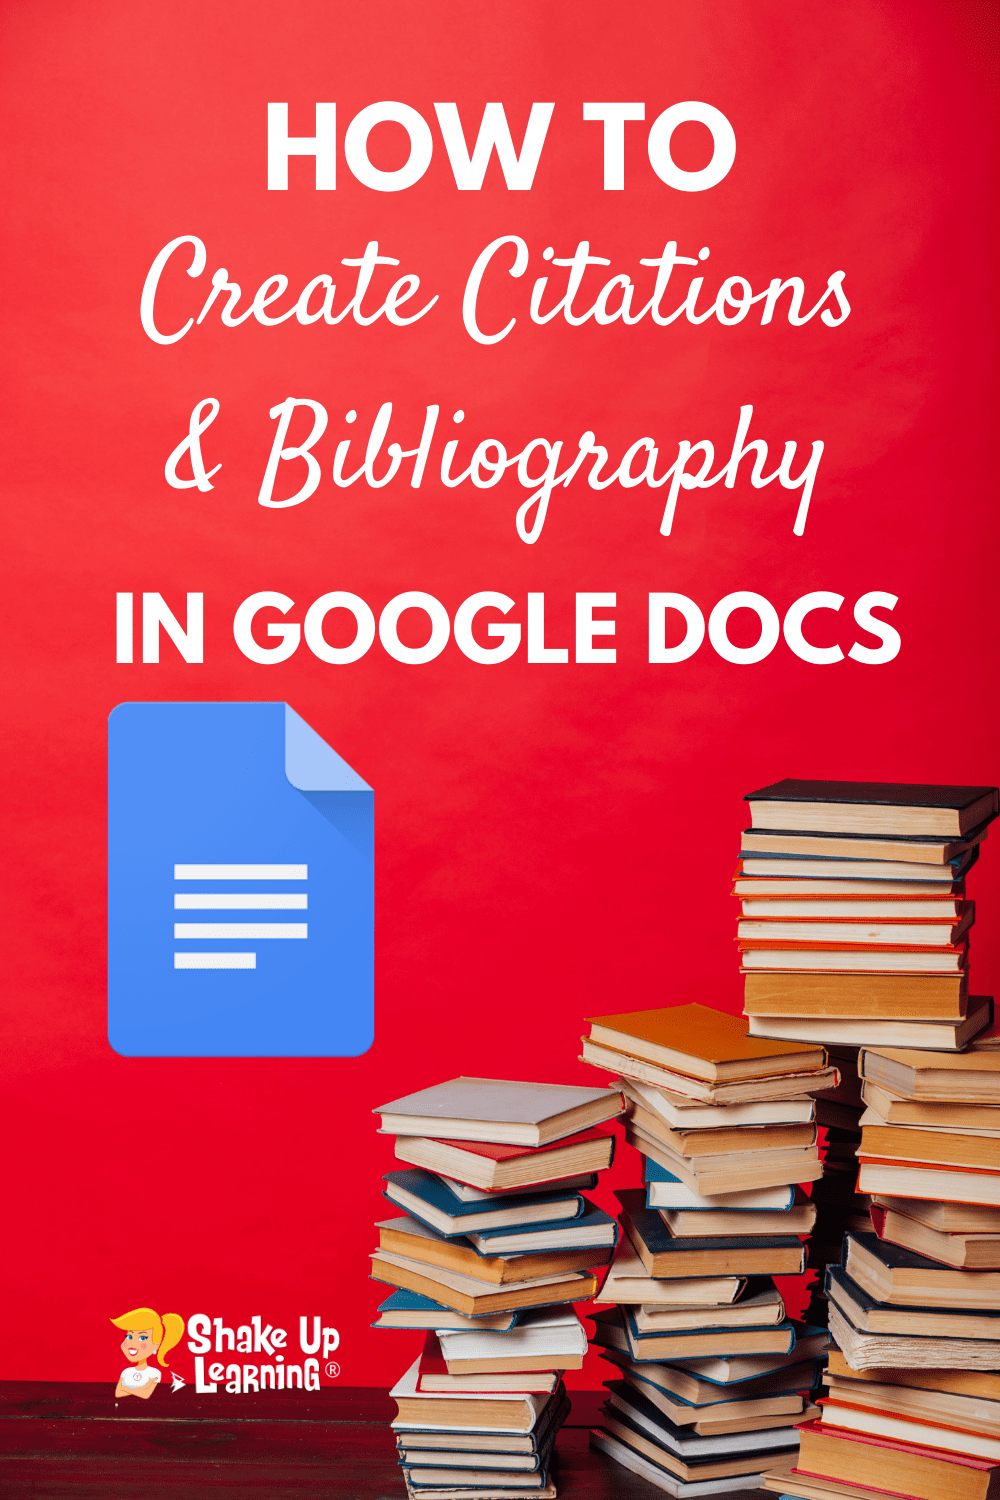 How to Create Citations and Bibliography in Google Docs